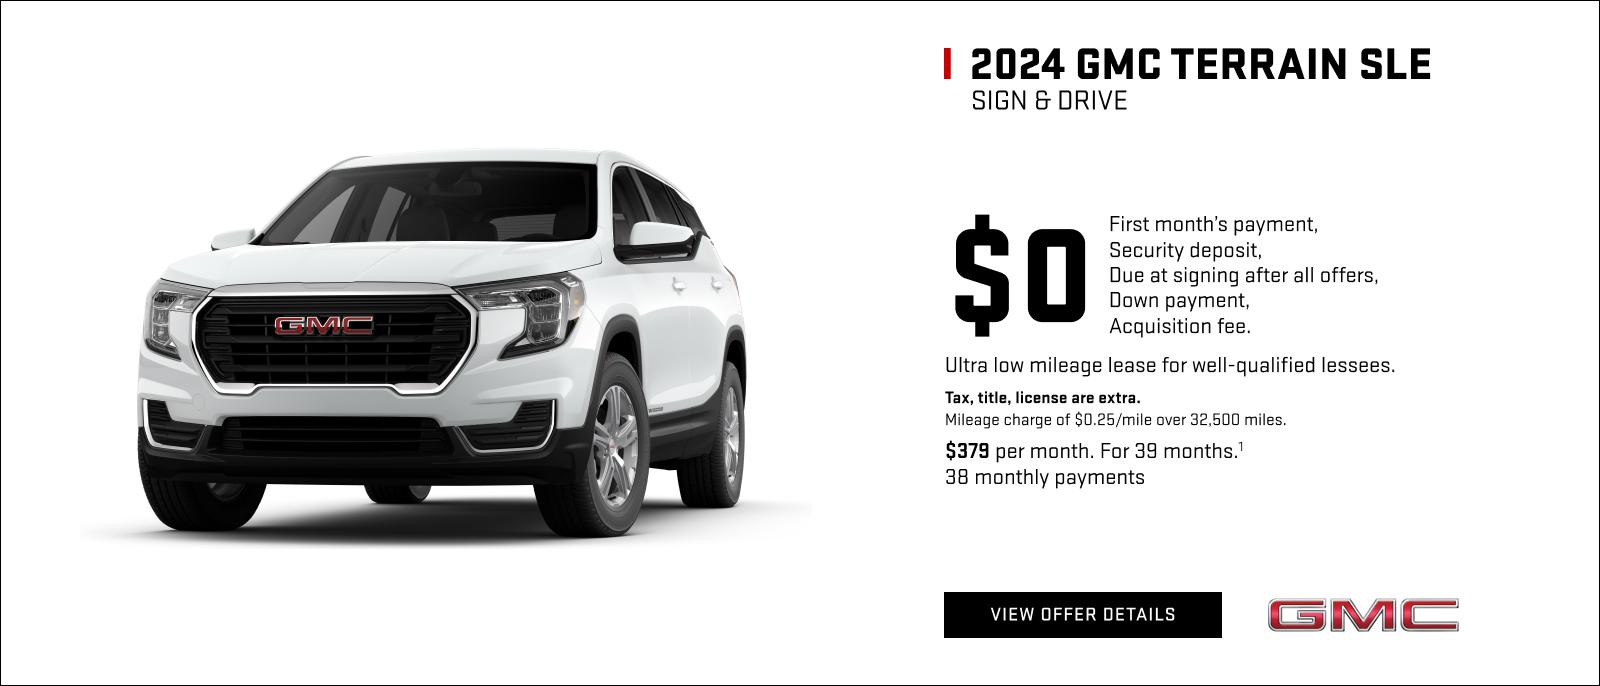 SIGN & DRIVE

$0
FIRST MONTH'S PAYMENT
SECURITY DEPOSIT
DUE AT LEASE SIGNING AFTER ALL OFFERS
DOWN PAYMENT
ACQUISITION FEE

Ultra low mileage lease for well-qualified lessees.

Tax, title, license are extra. Mileage charge of $0.25/mile over 32,500 miles.

$379 per month. For 39 months.1
38 monthly payments